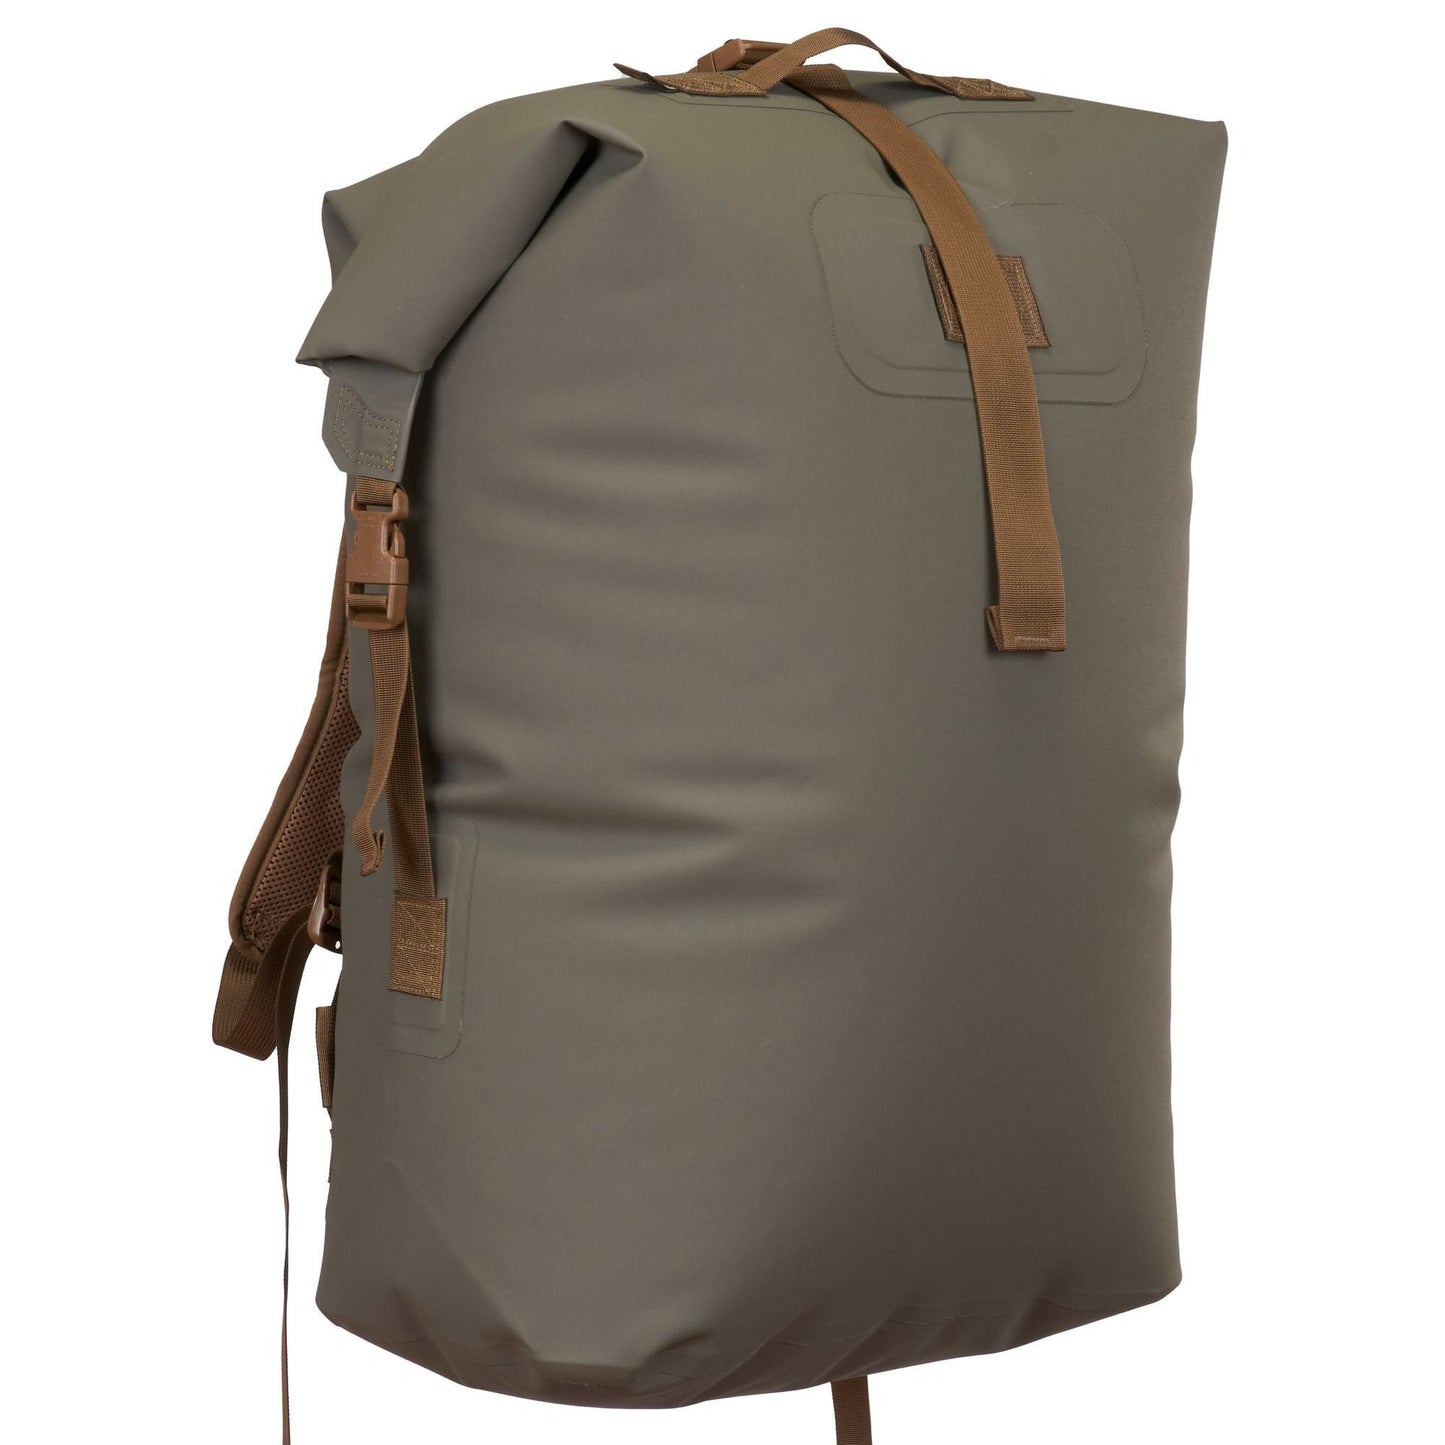 Featuring the Westwater Drypack dry bag manufactured by Watershed shown here from a fifth angle.